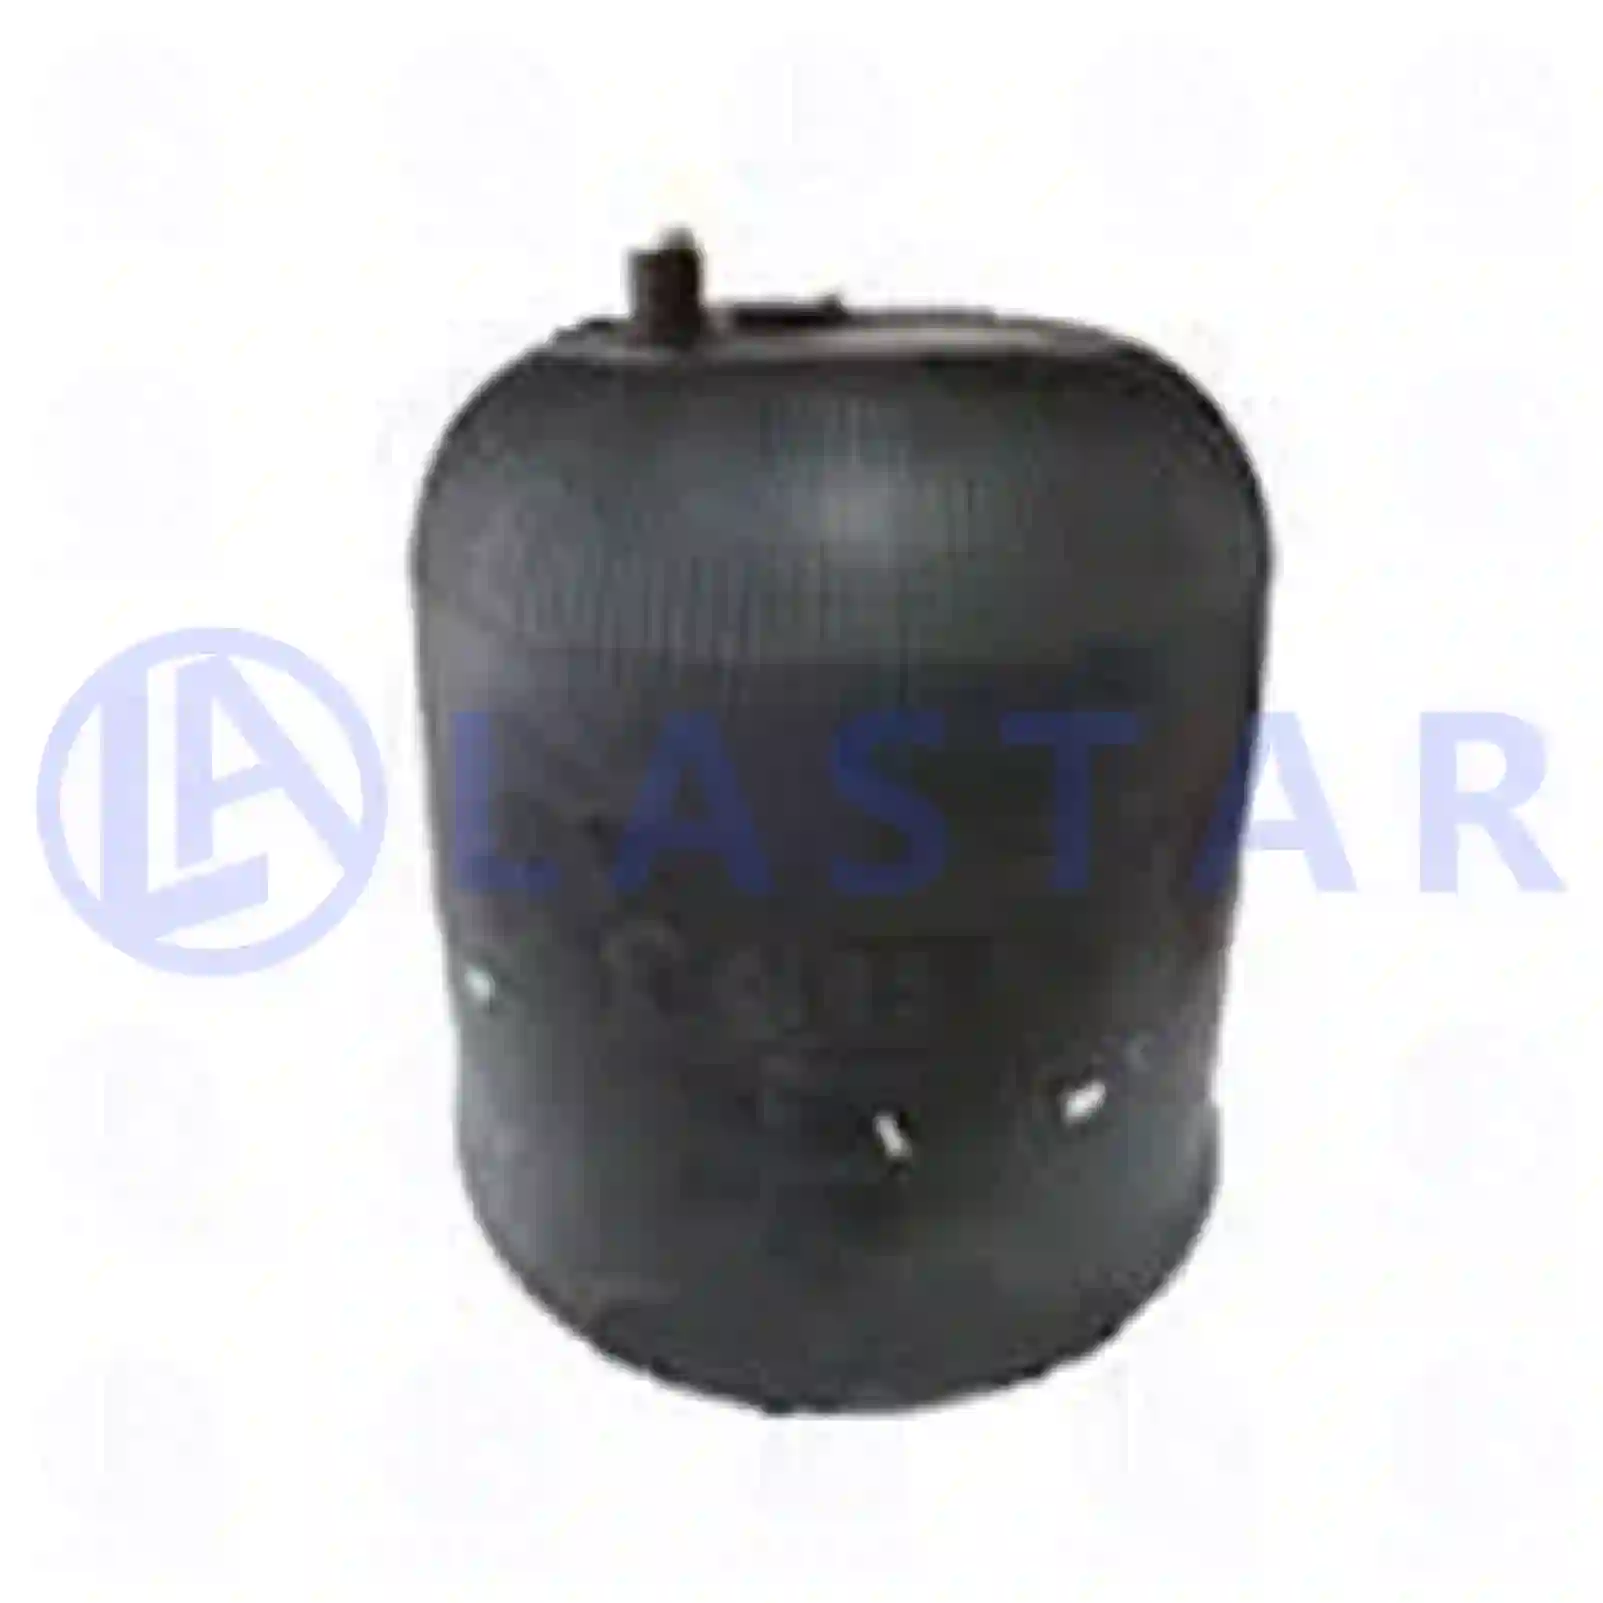 Air spring, with steel piston, 77728222, 9423200321, , , ||  77728222 Lastar Spare Part | Truck Spare Parts, Auotomotive Spare Parts Air spring, with steel piston, 77728222, 9423200321, , , ||  77728222 Lastar Spare Part | Truck Spare Parts, Auotomotive Spare Parts